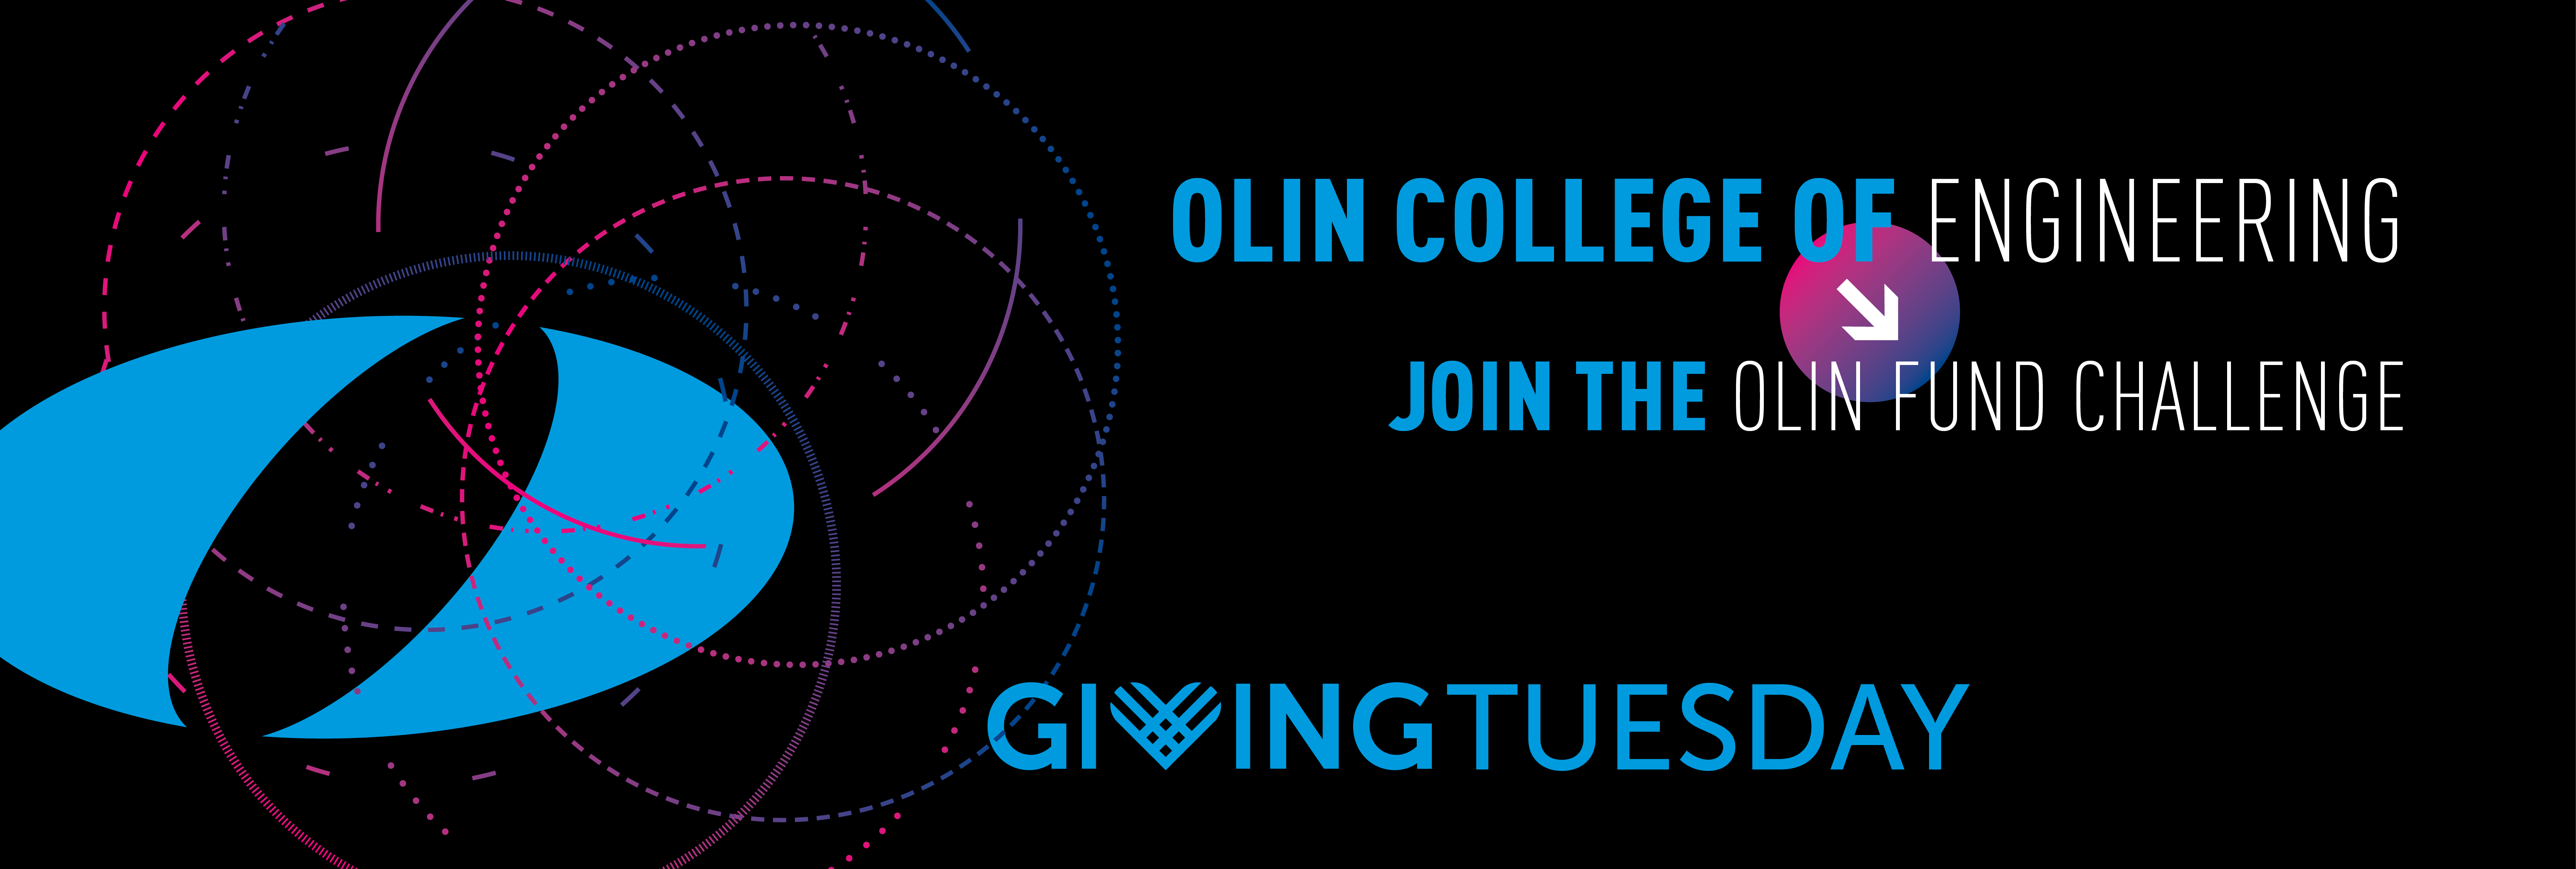 Olin Giving Tuesday social media cover photo graphic